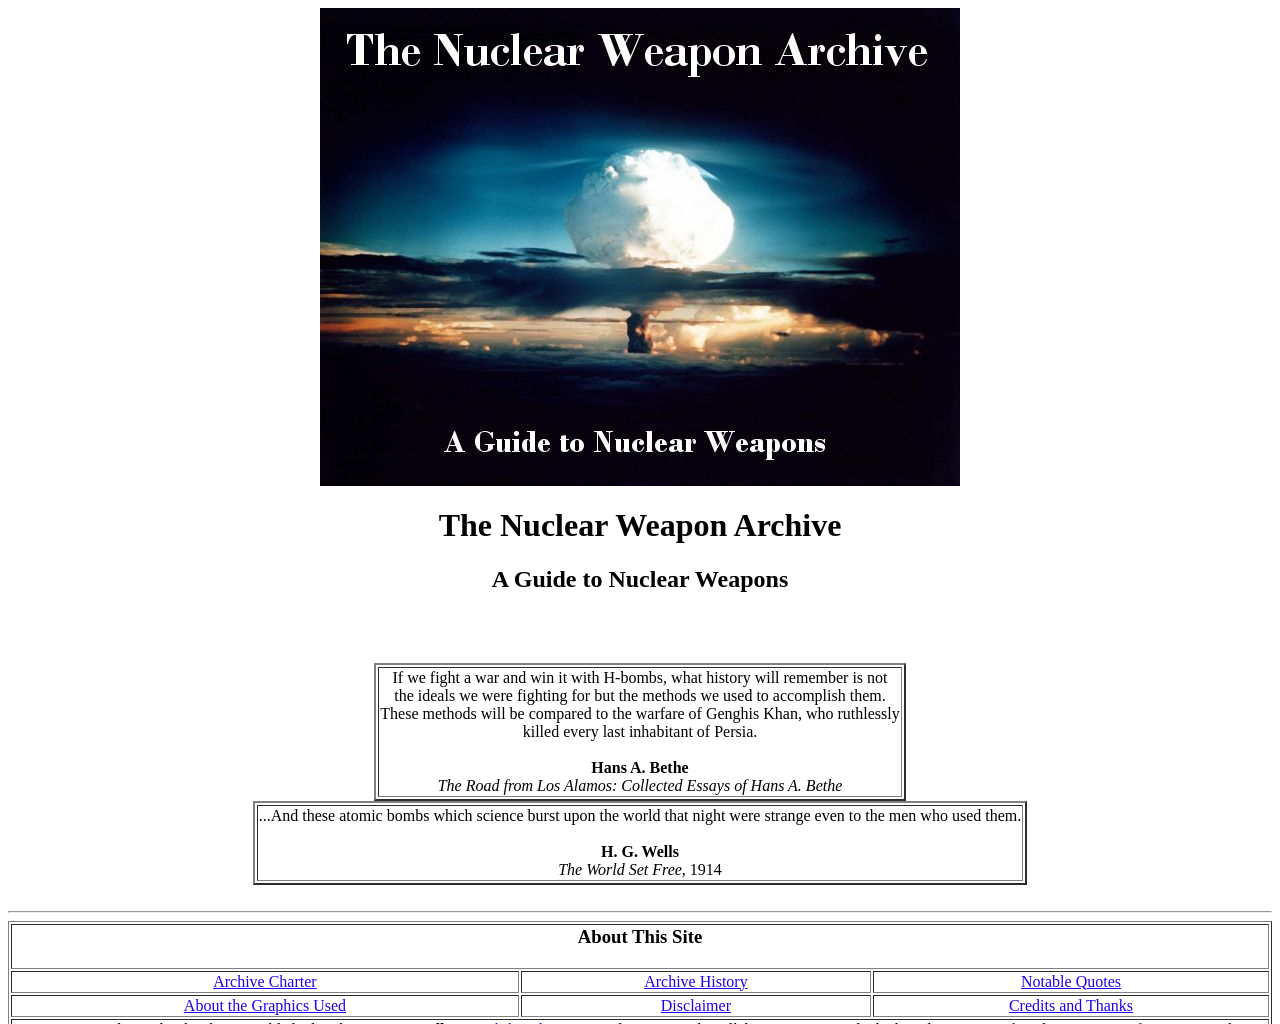 nuclearweaponarchive.org